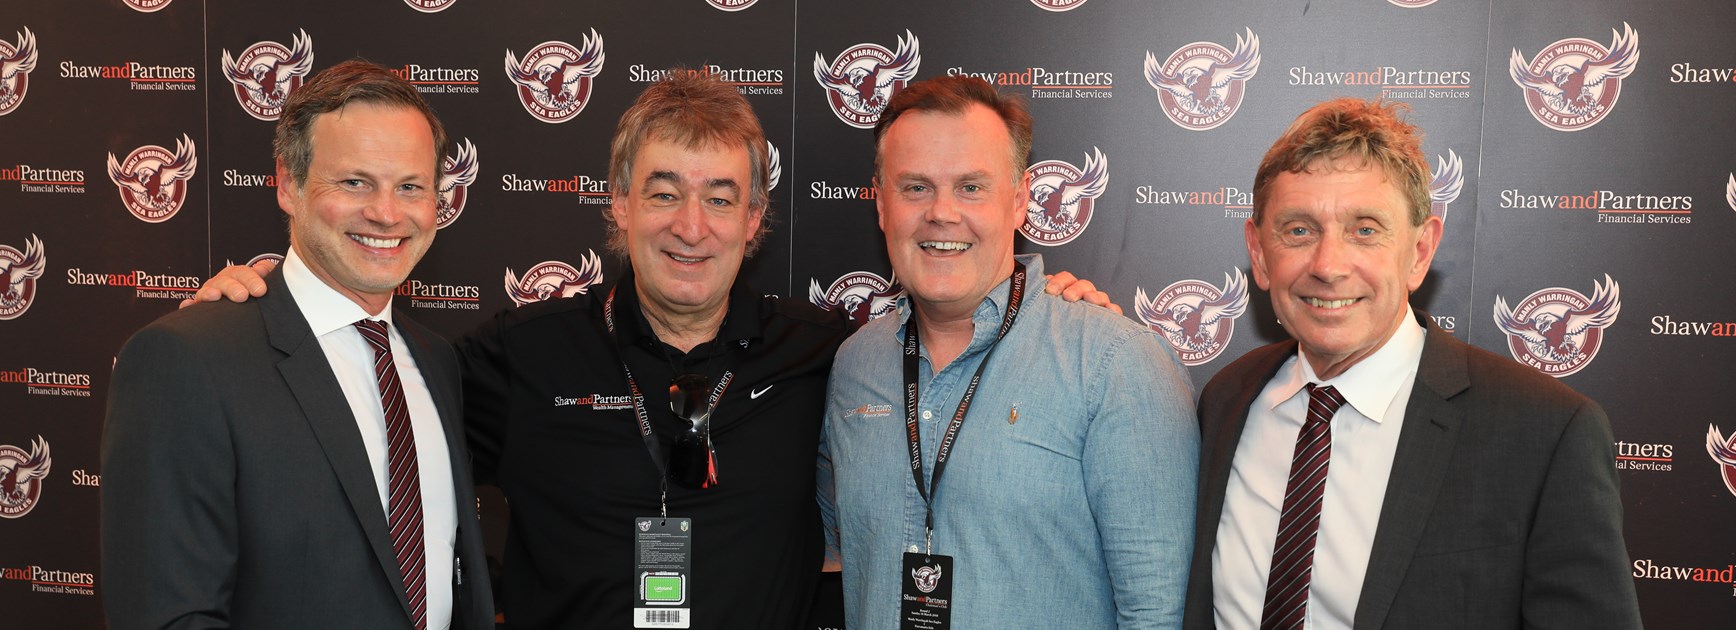 Shaw and Partners extend as Premier Partner of the Sea Eagles